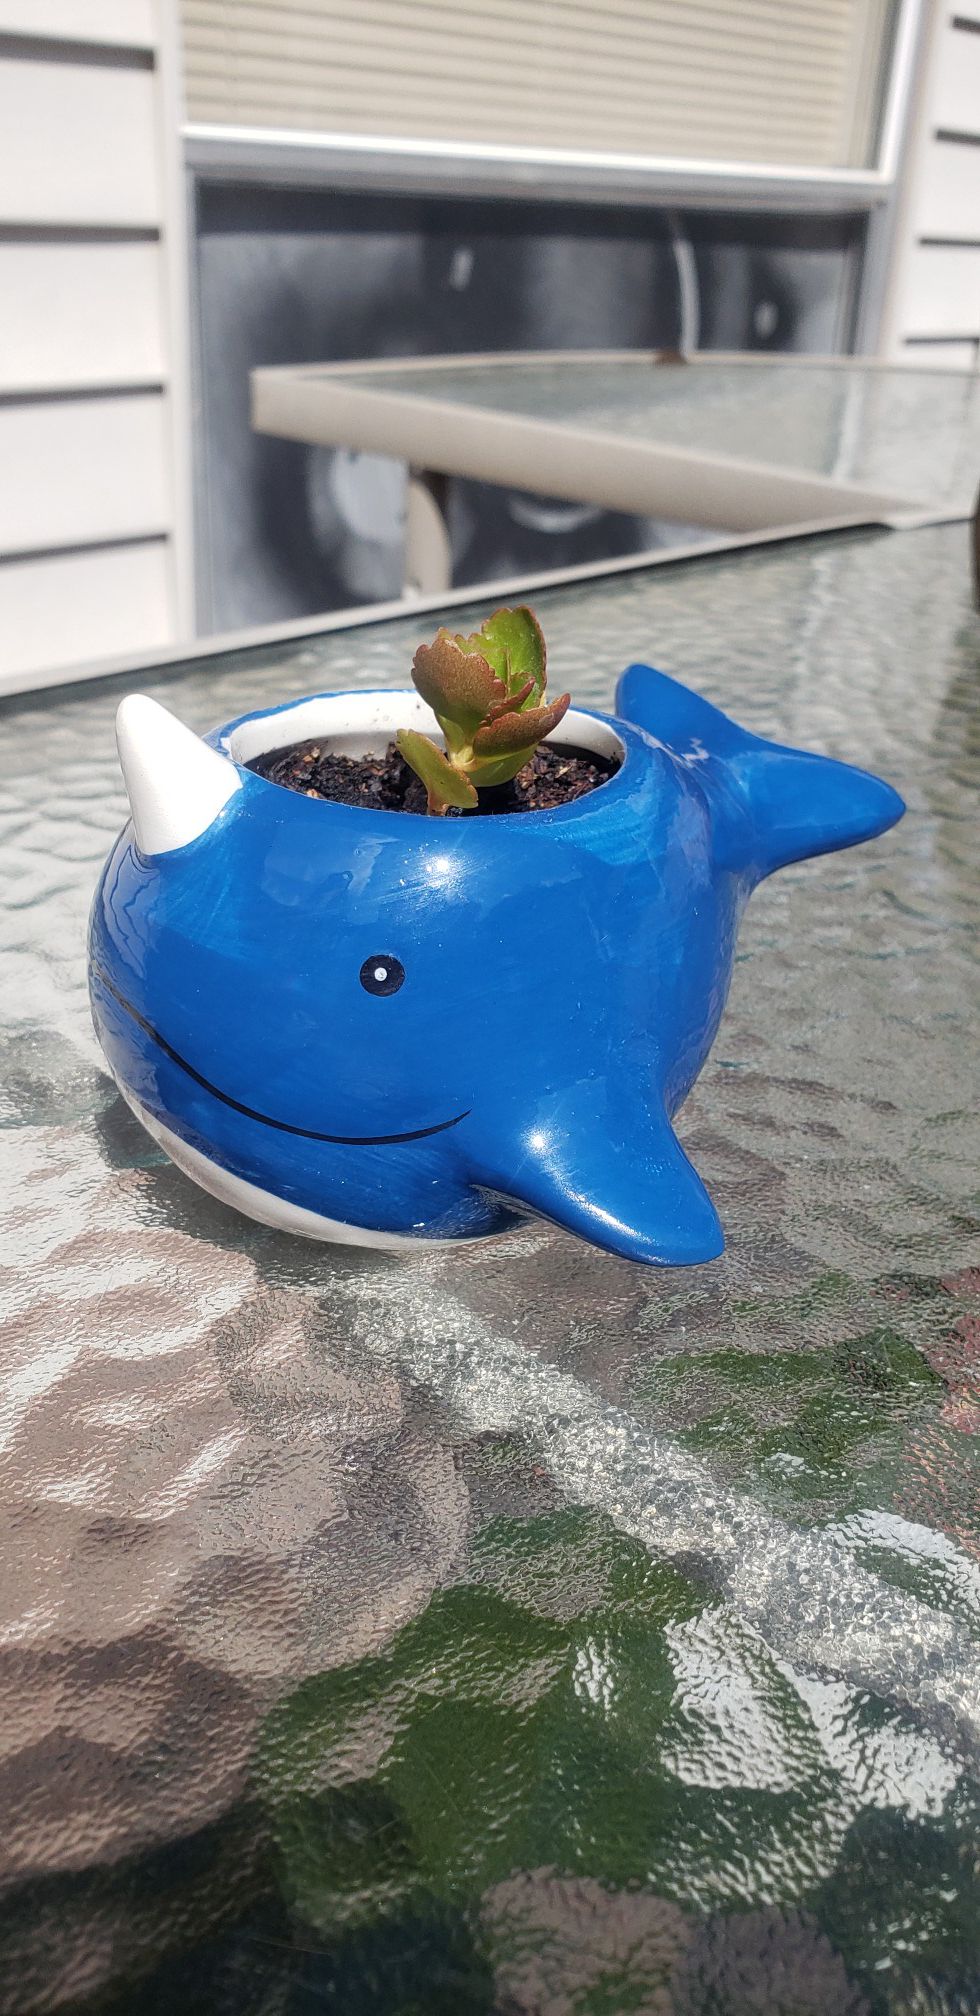 FLAMING KATY KALANCHOE PLANT IN A NARWHAL POT